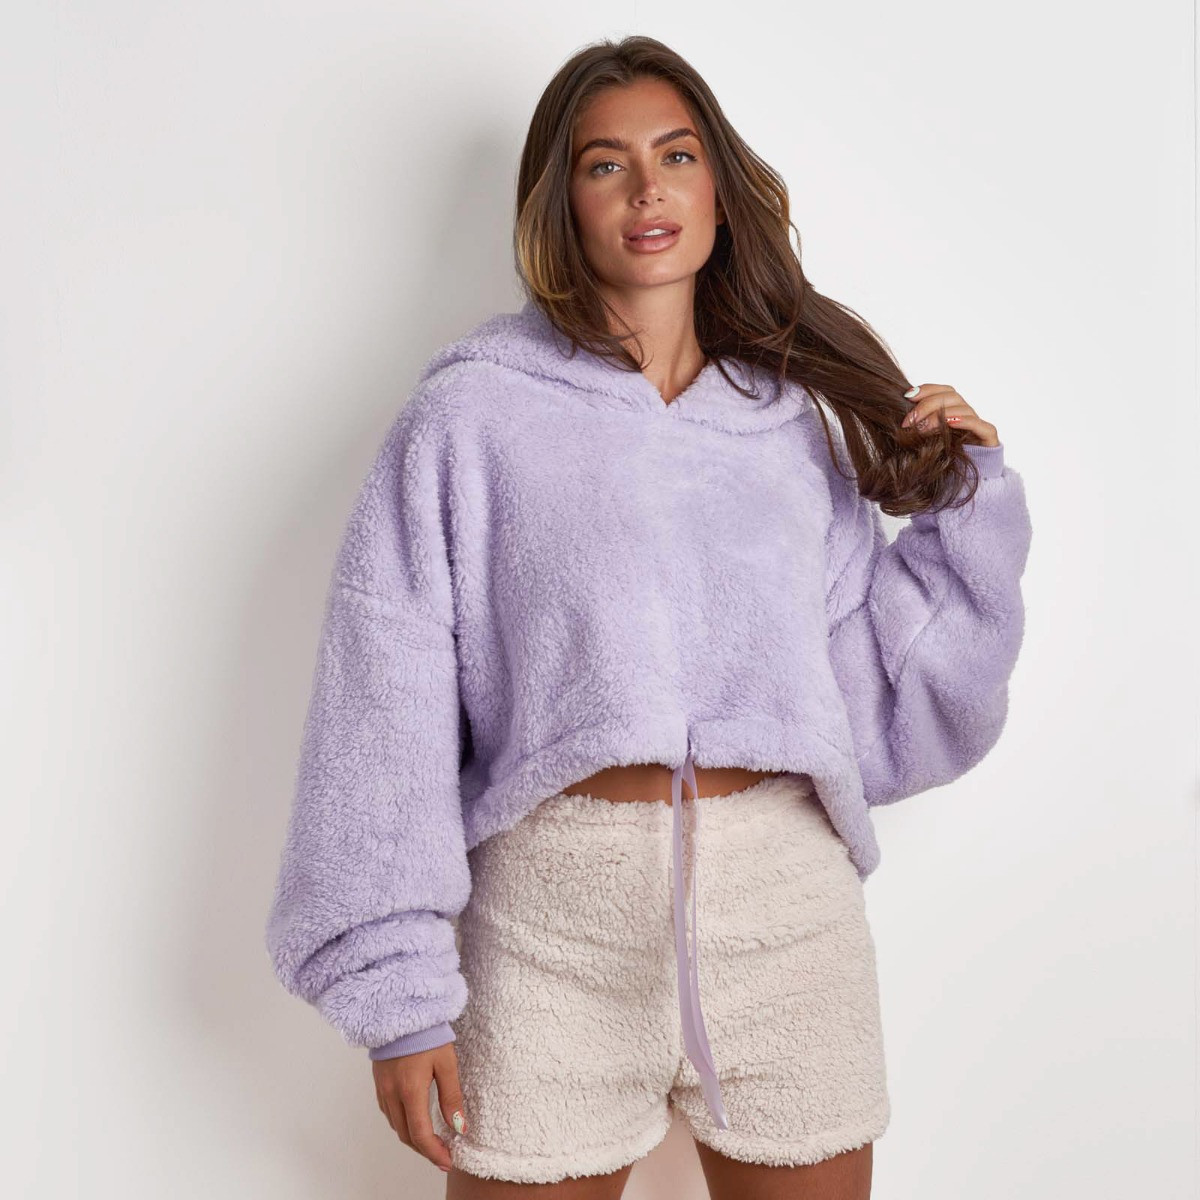 Brentfords Cropped Teddy Fleece Hoodie, One Size - Lilac>